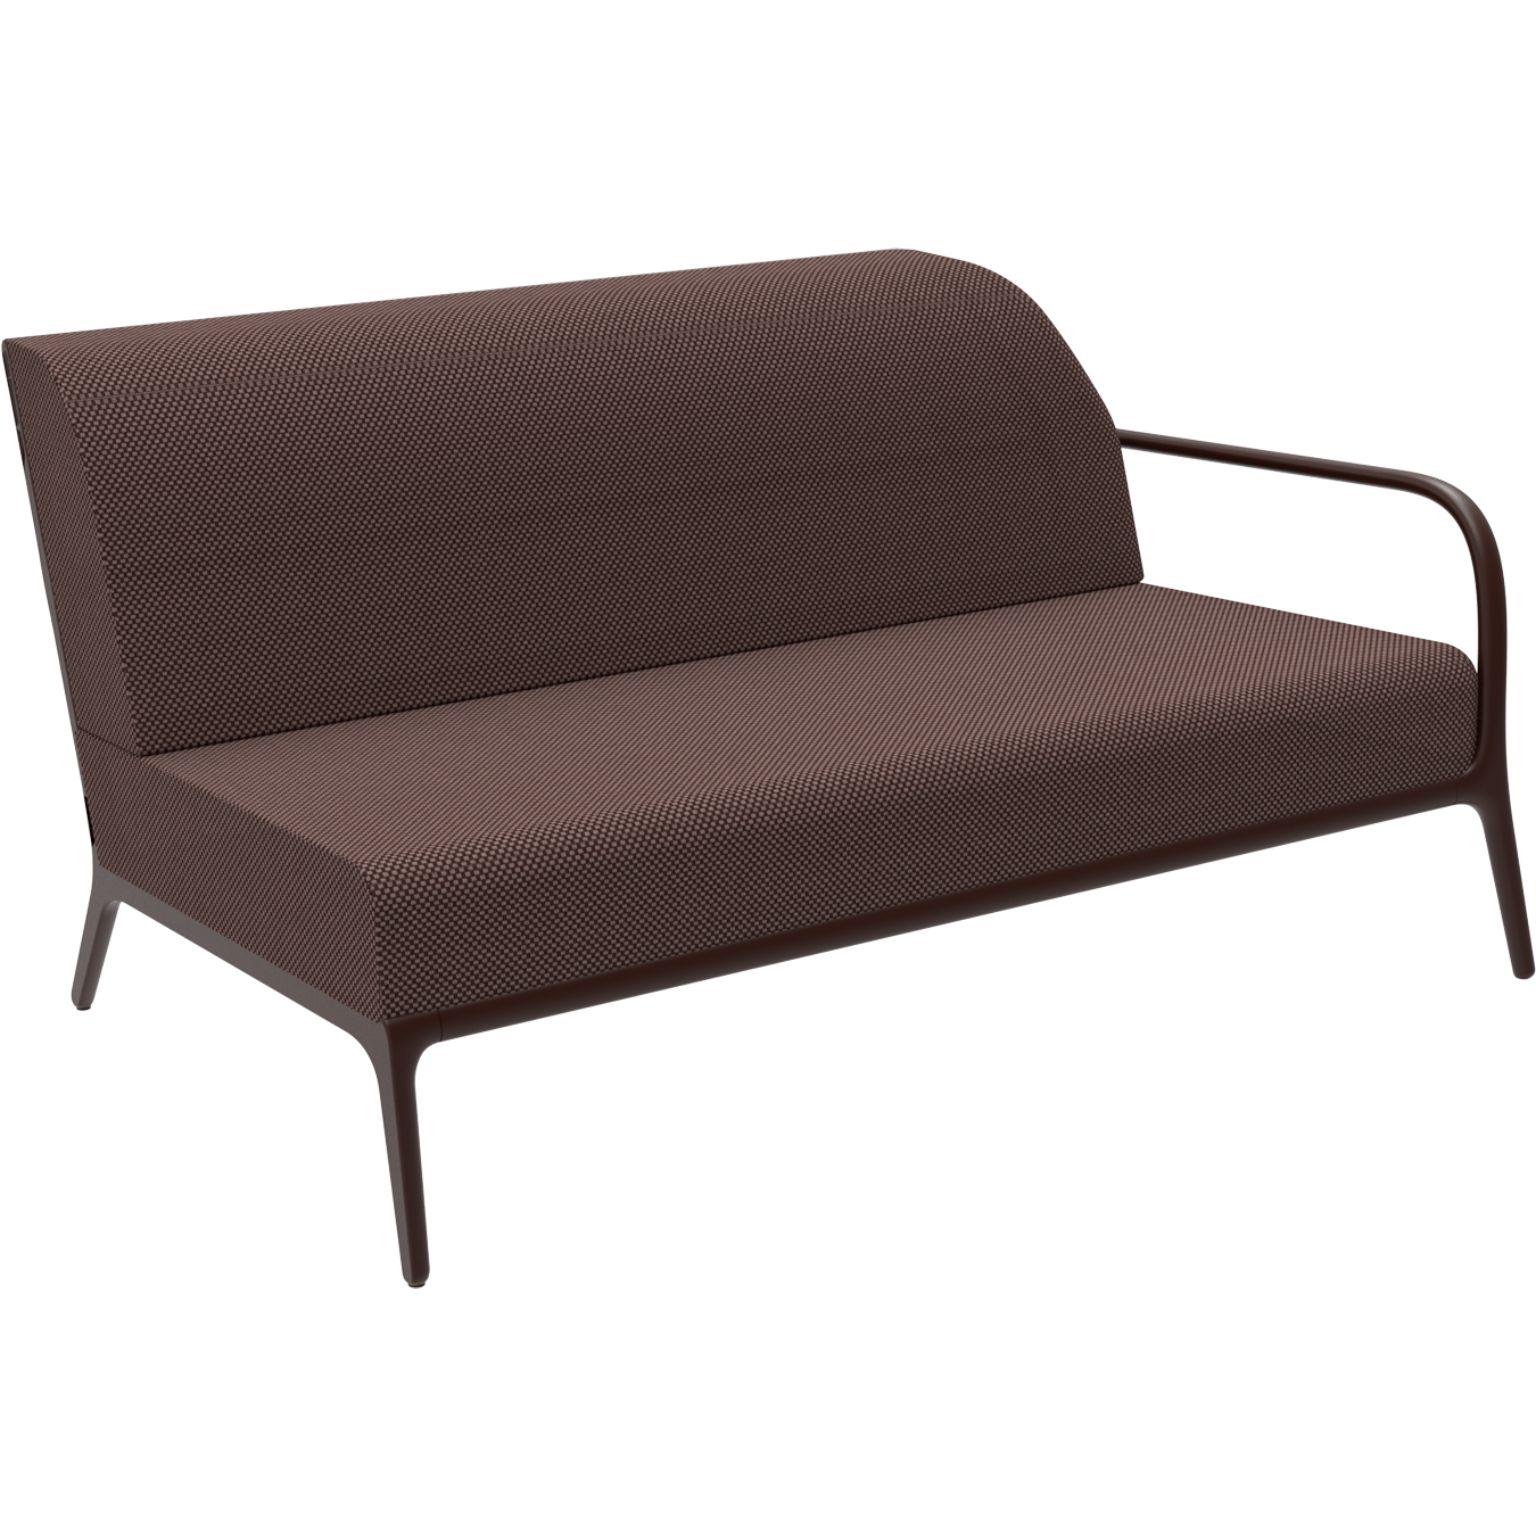 Xaloc Left 160 Chocolate Modular sofa by MOWEE
Dimensions: D100 x W160 x H81 cm (Seat Height 42cm)
Material: Aluminium, Textile
Weight: 37 kg
Also Available in different colors and finishes. 

 Xaloc synthesizes the lines of interior furniture